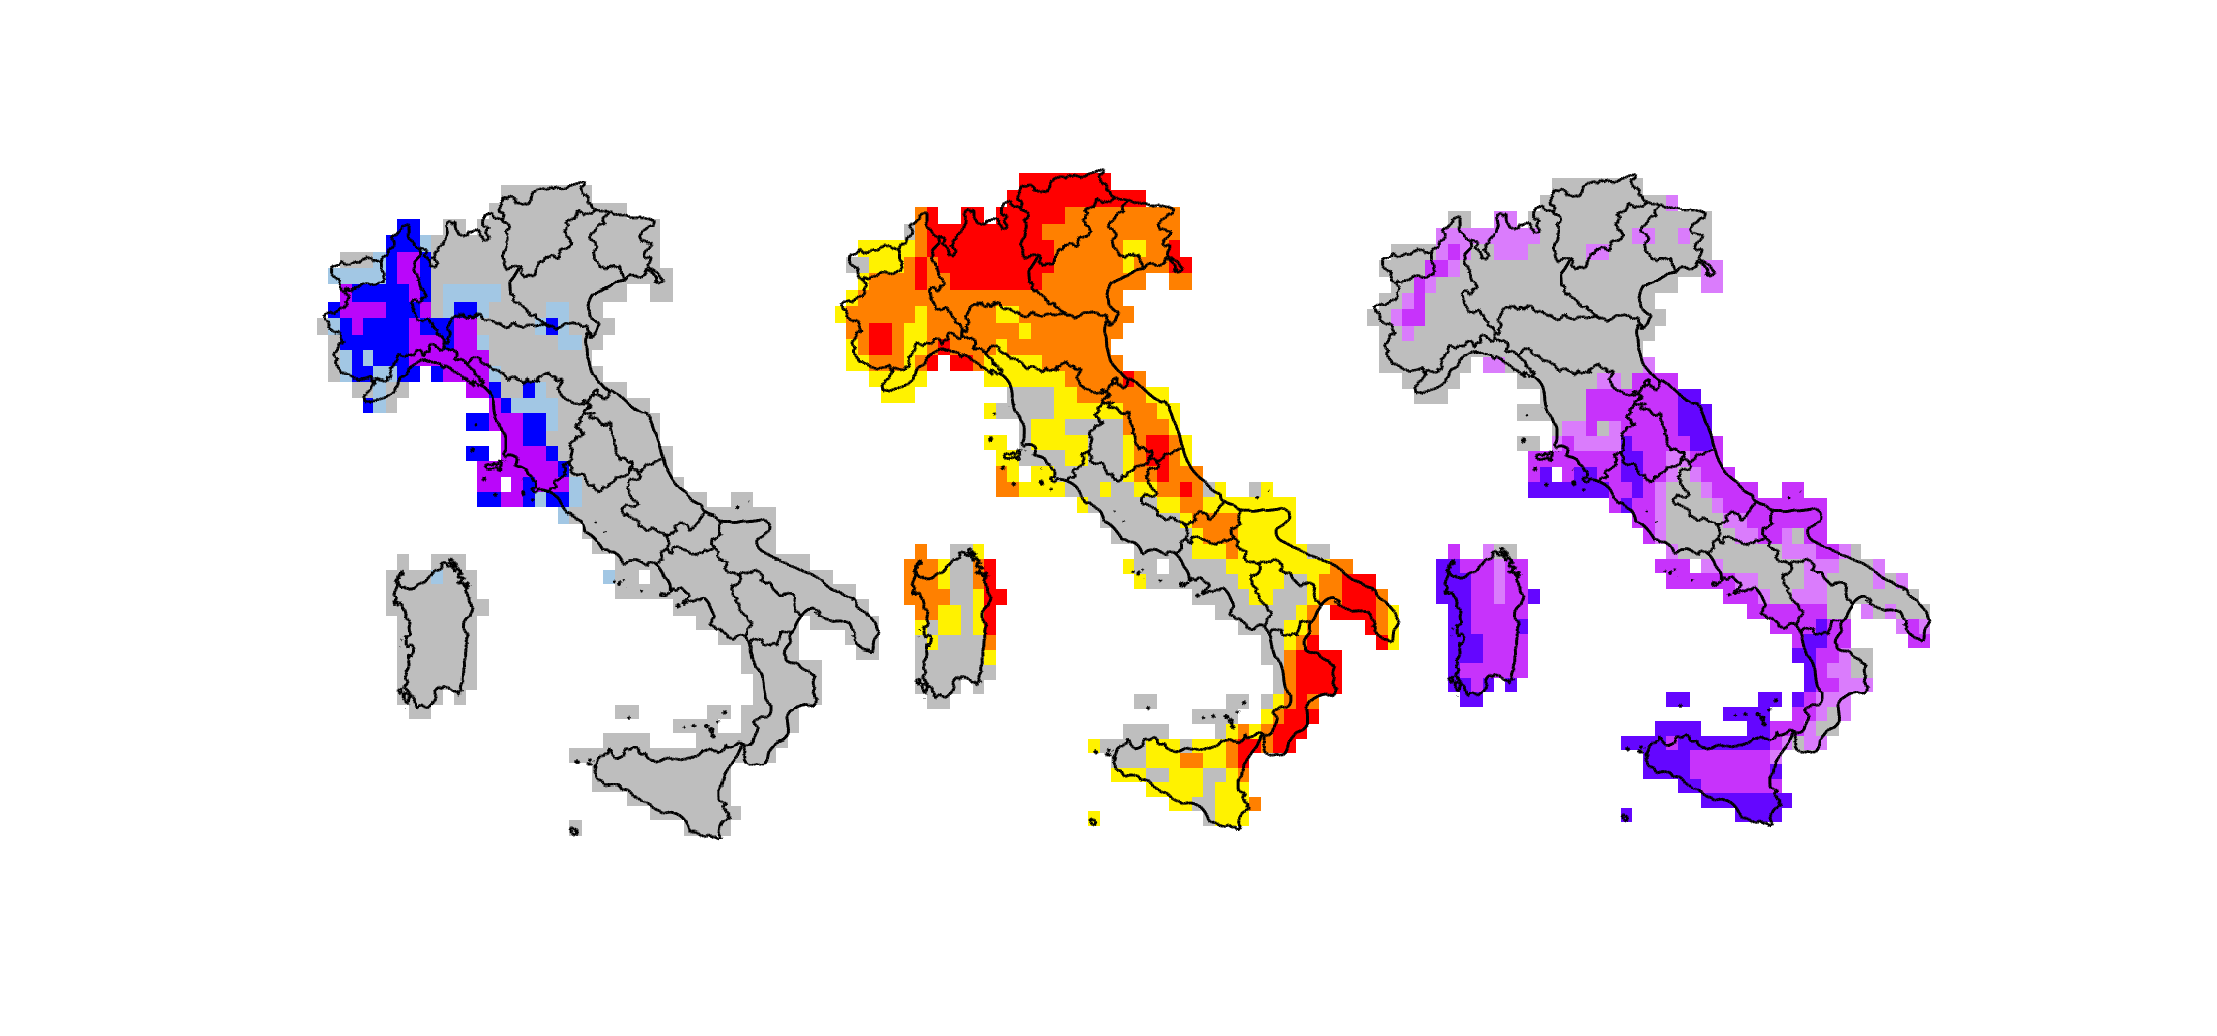 Earth Day: a map of extreme events in Italy